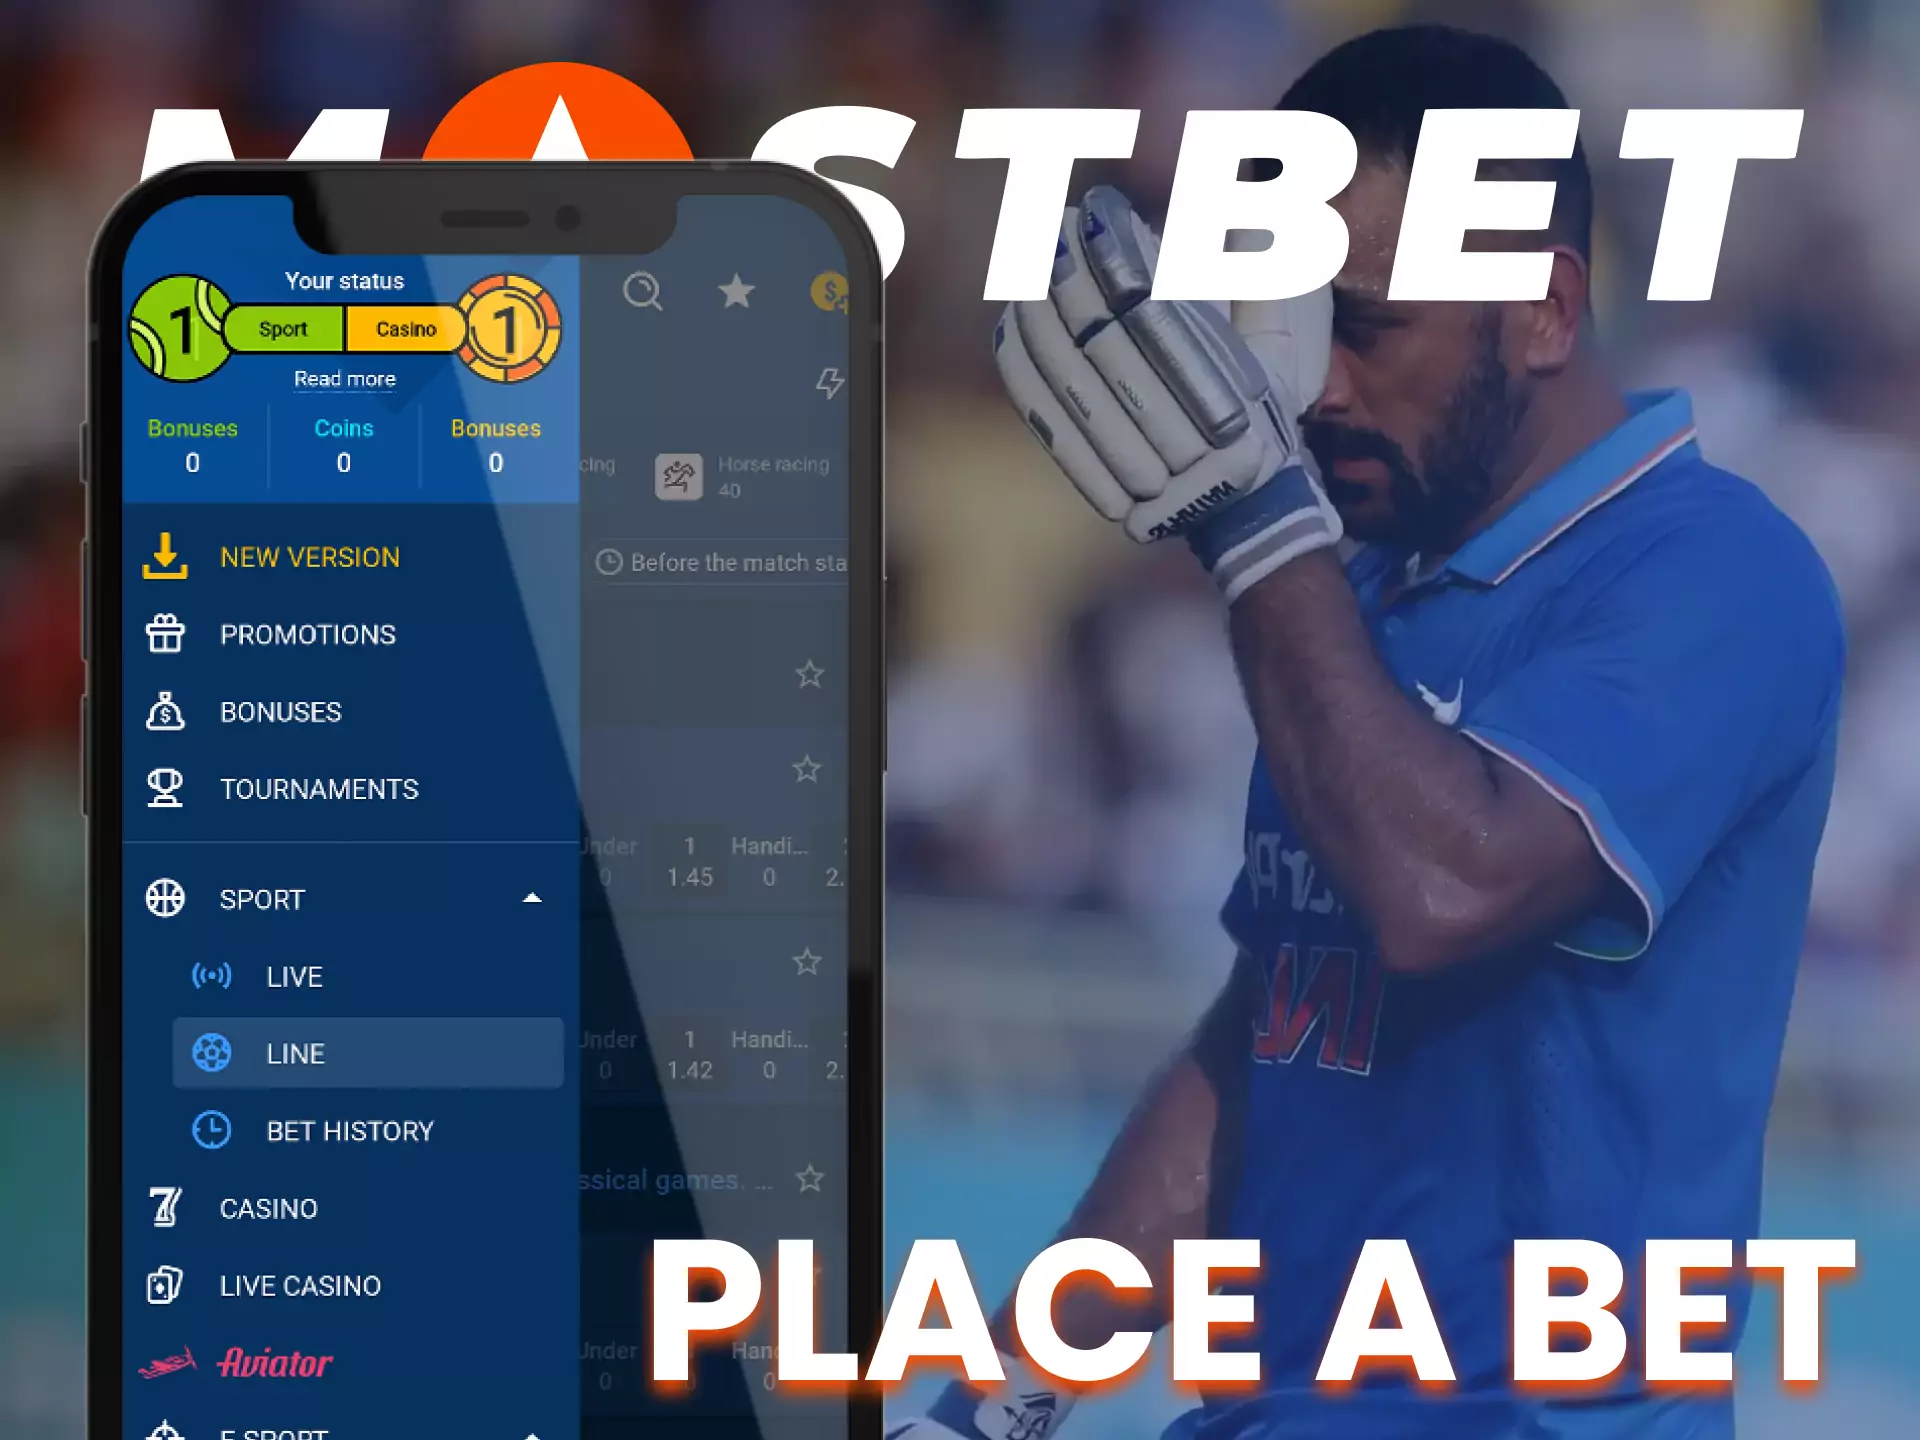 With these instructions, start easily betting on the Mostbet app.